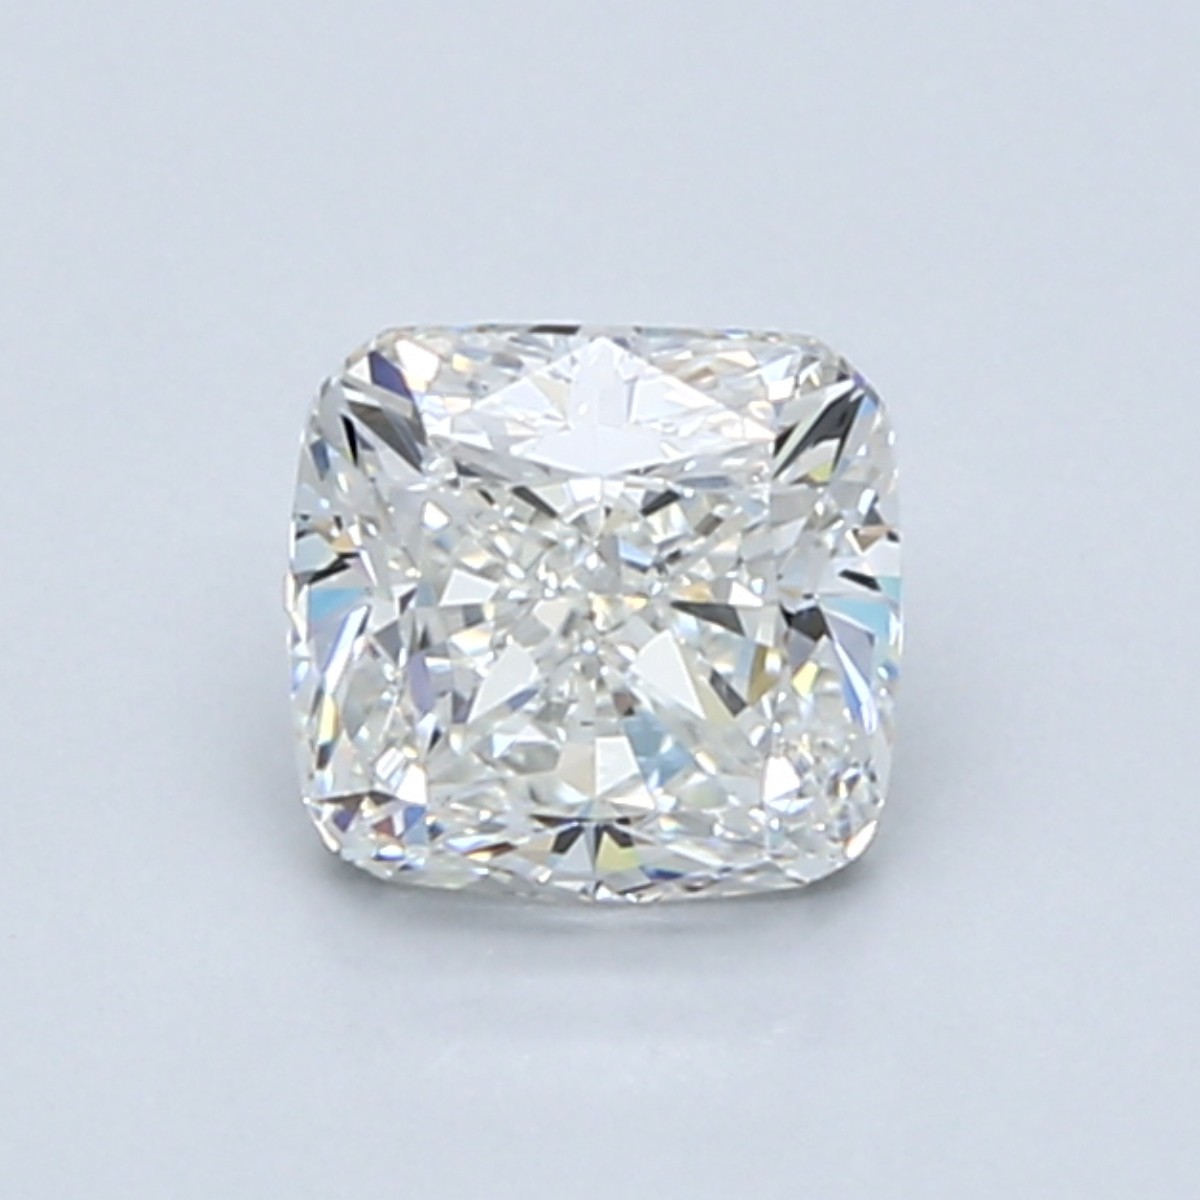 Cushion 1.01 Carat G Color VS2 Clarity For Sale